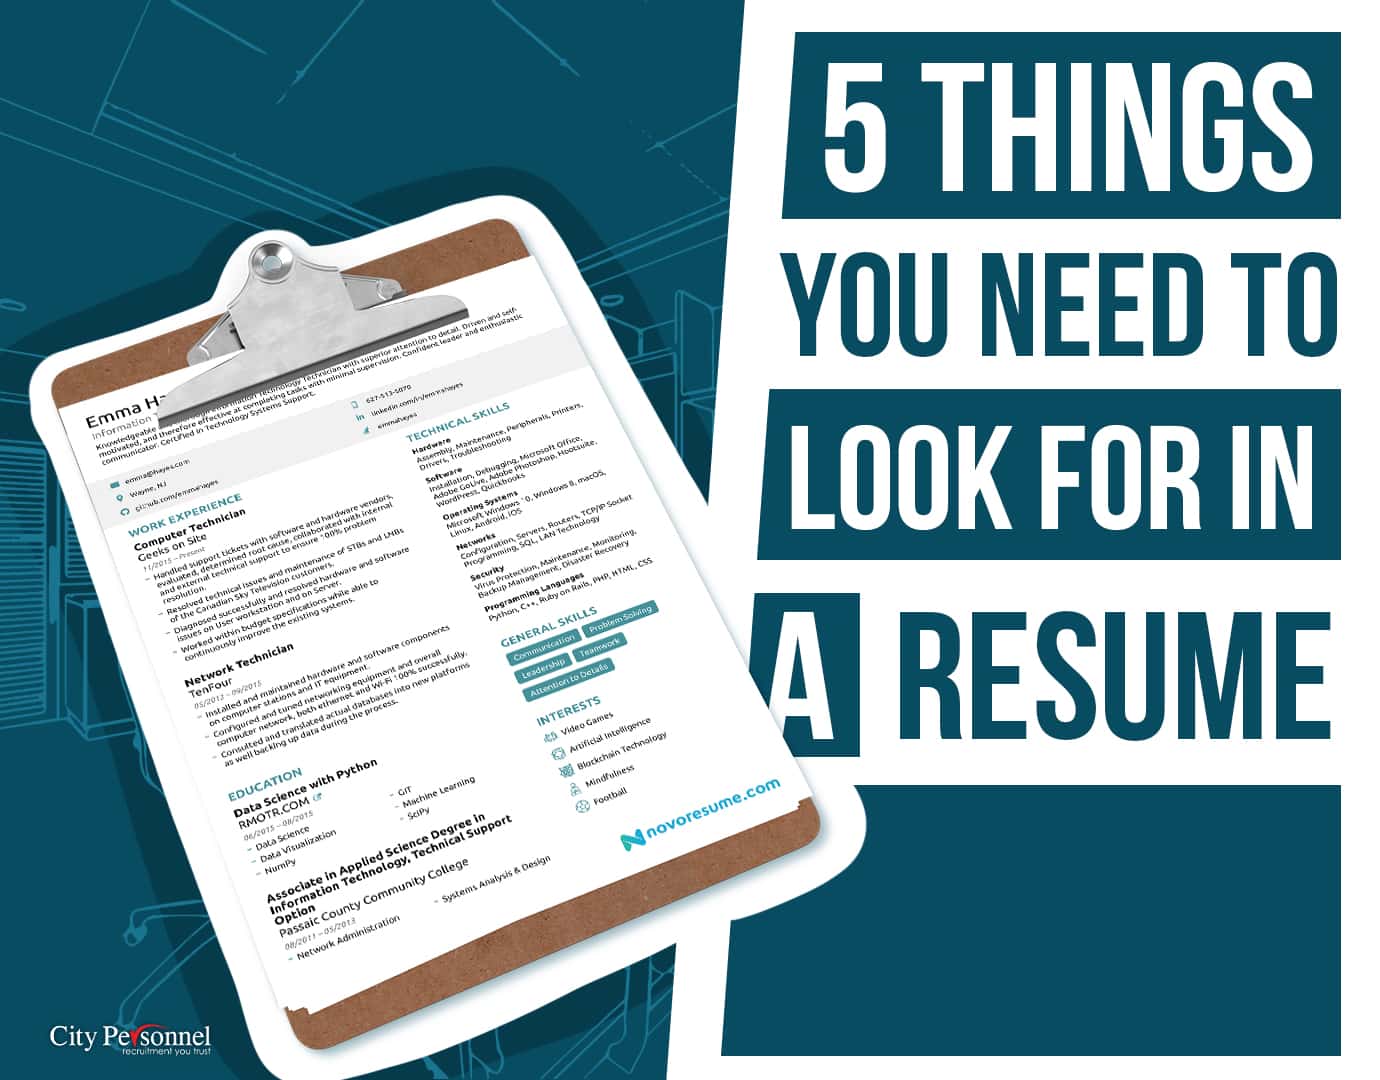 5 Things You Need to Look for in a Resume